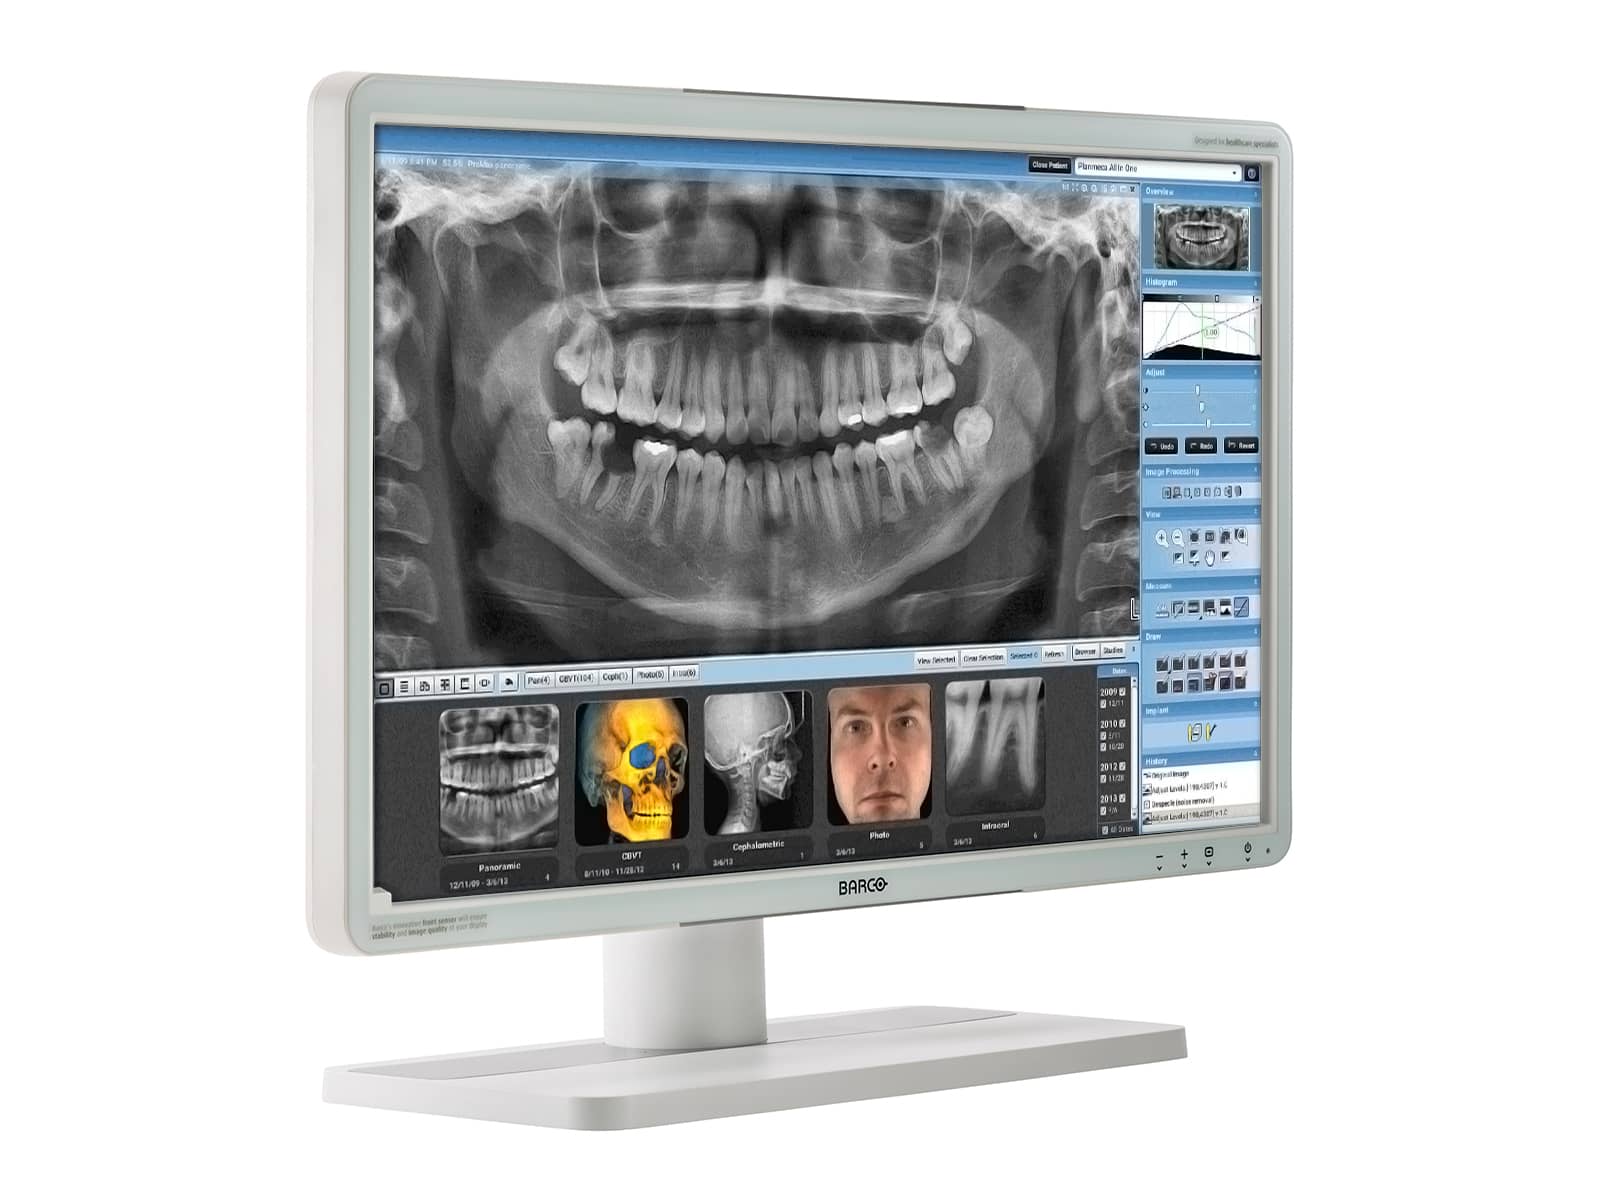 Barco Eonis MDRC-2224 MKII 2MP 24" Color LED Clinical Review Display (K9301806A) Monitors.com 